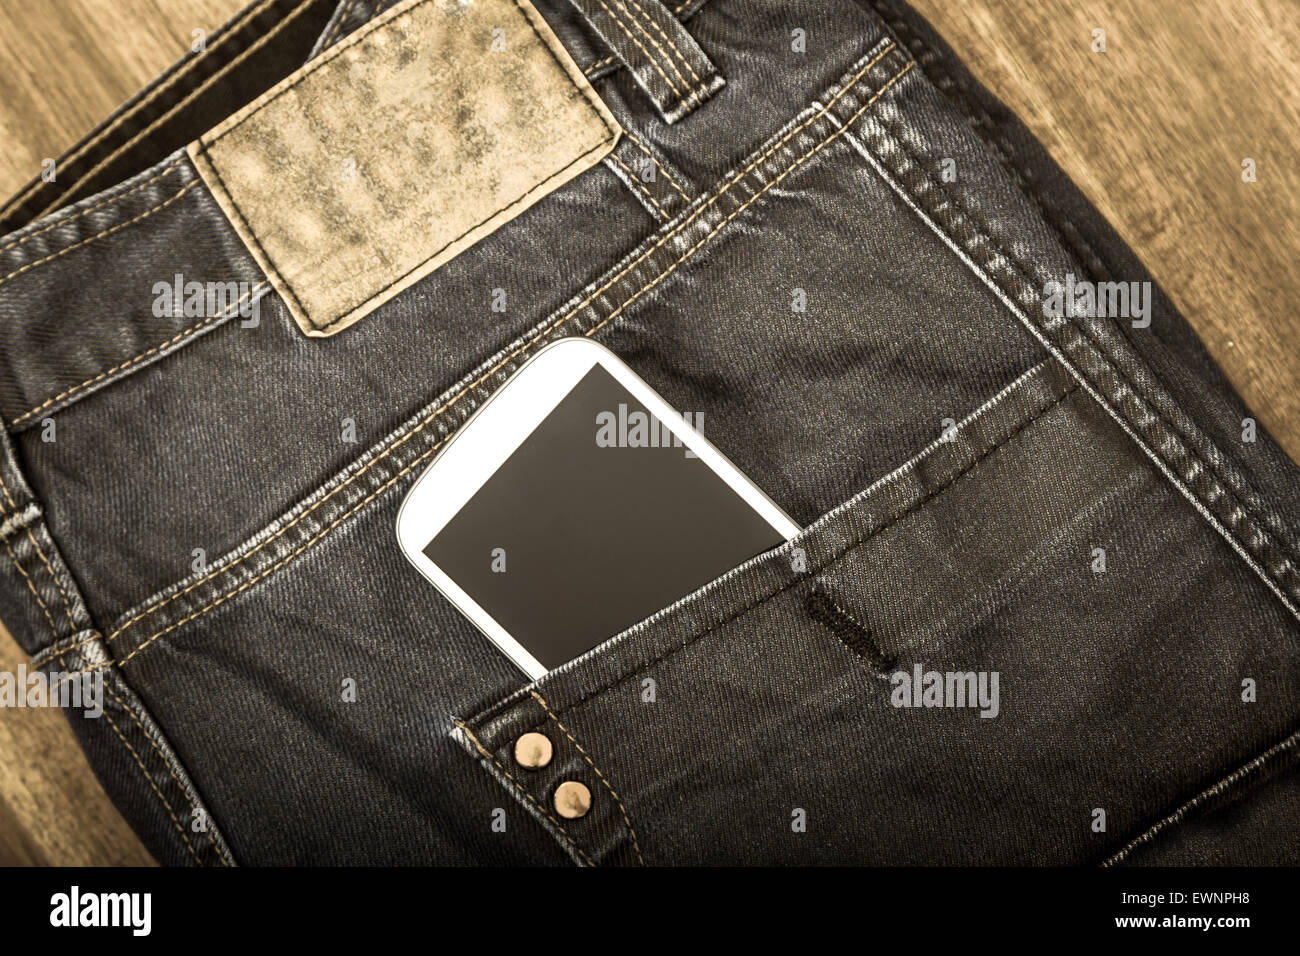 Jeans with cellphone in the pocket, background Stock Photo